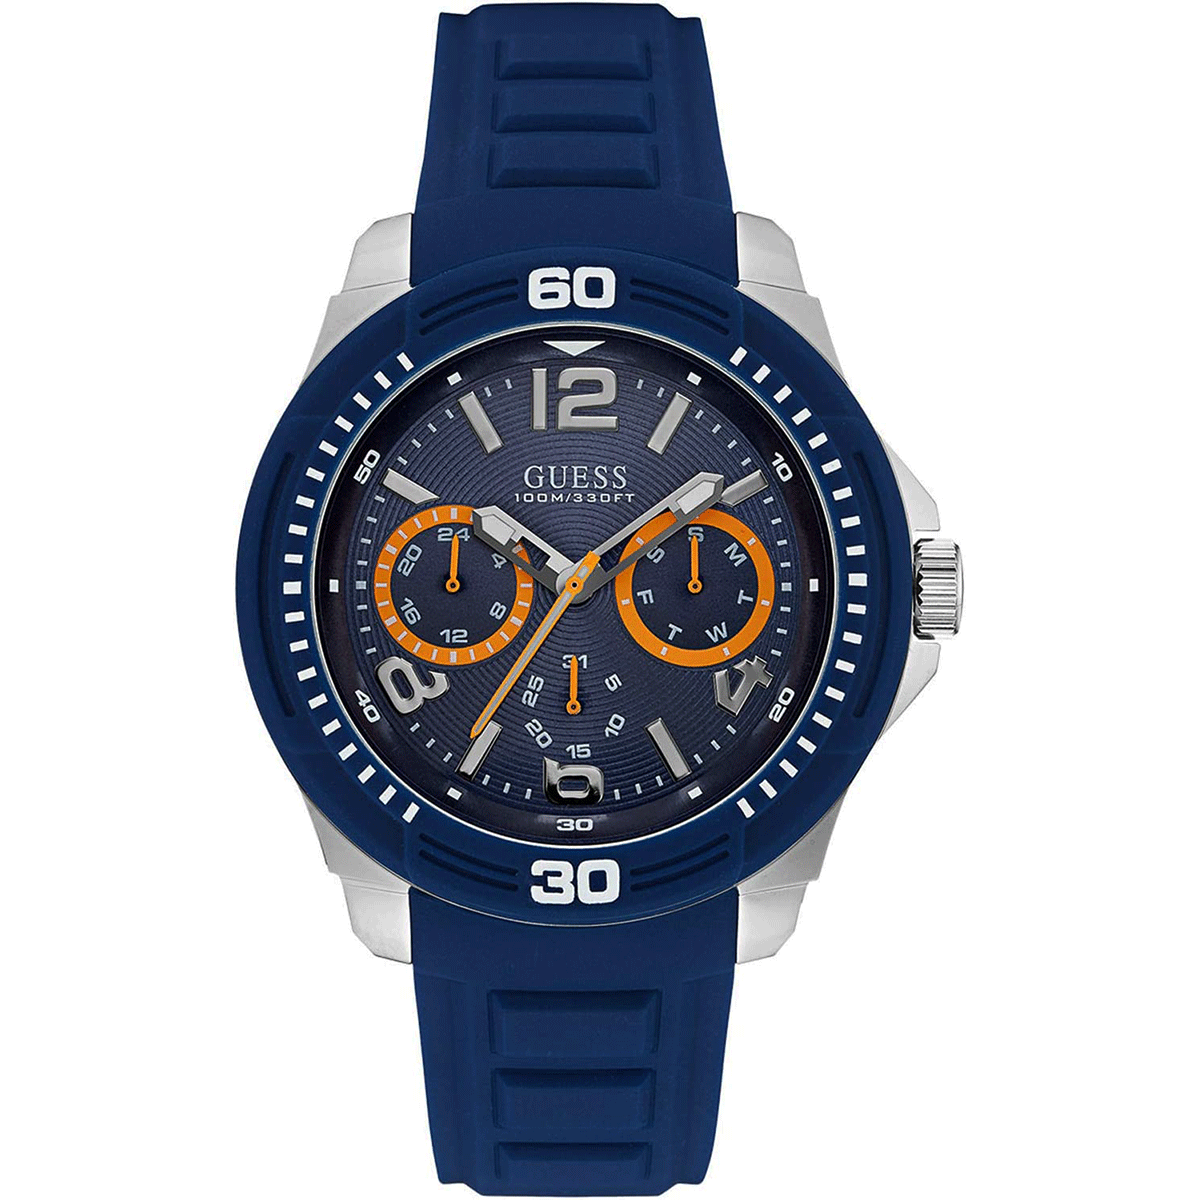 Multifunction Guess watch for men with blue rubber strap